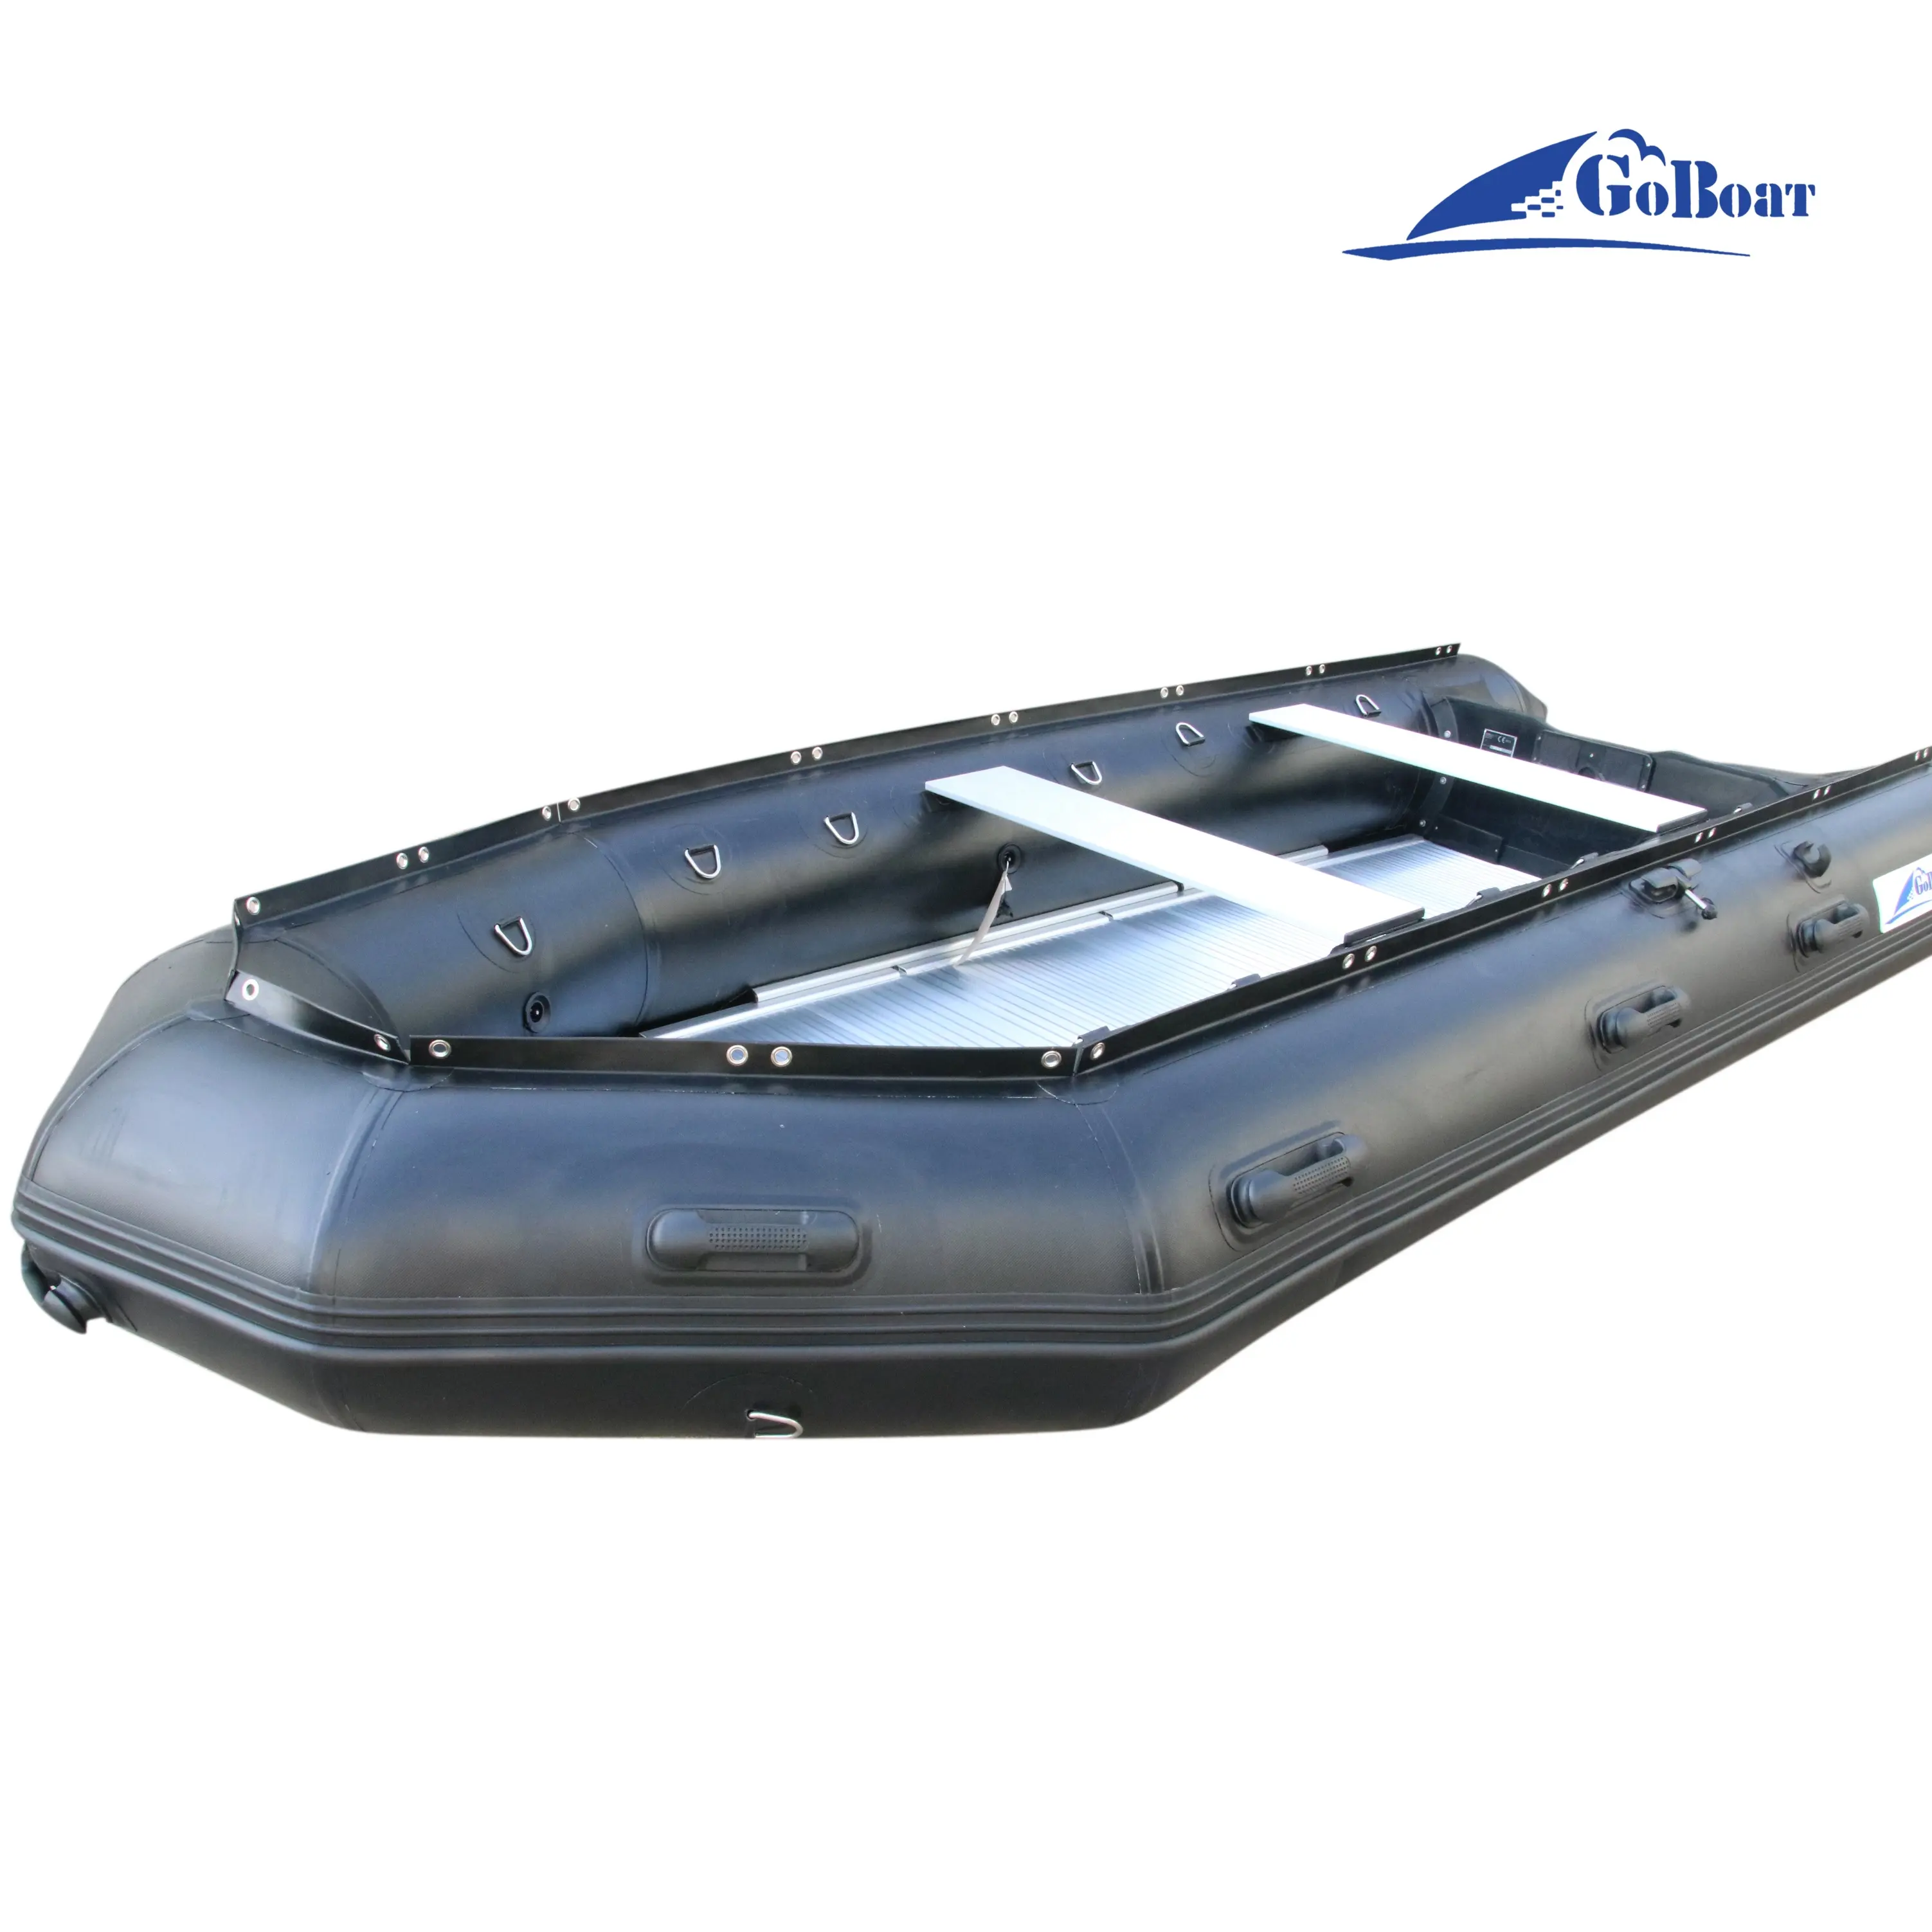 Goethe 430cm GTS430 14ft Jet Boat For Sale China Aluminum Boats Cheap Fishing Inflatable Kayak Accessories